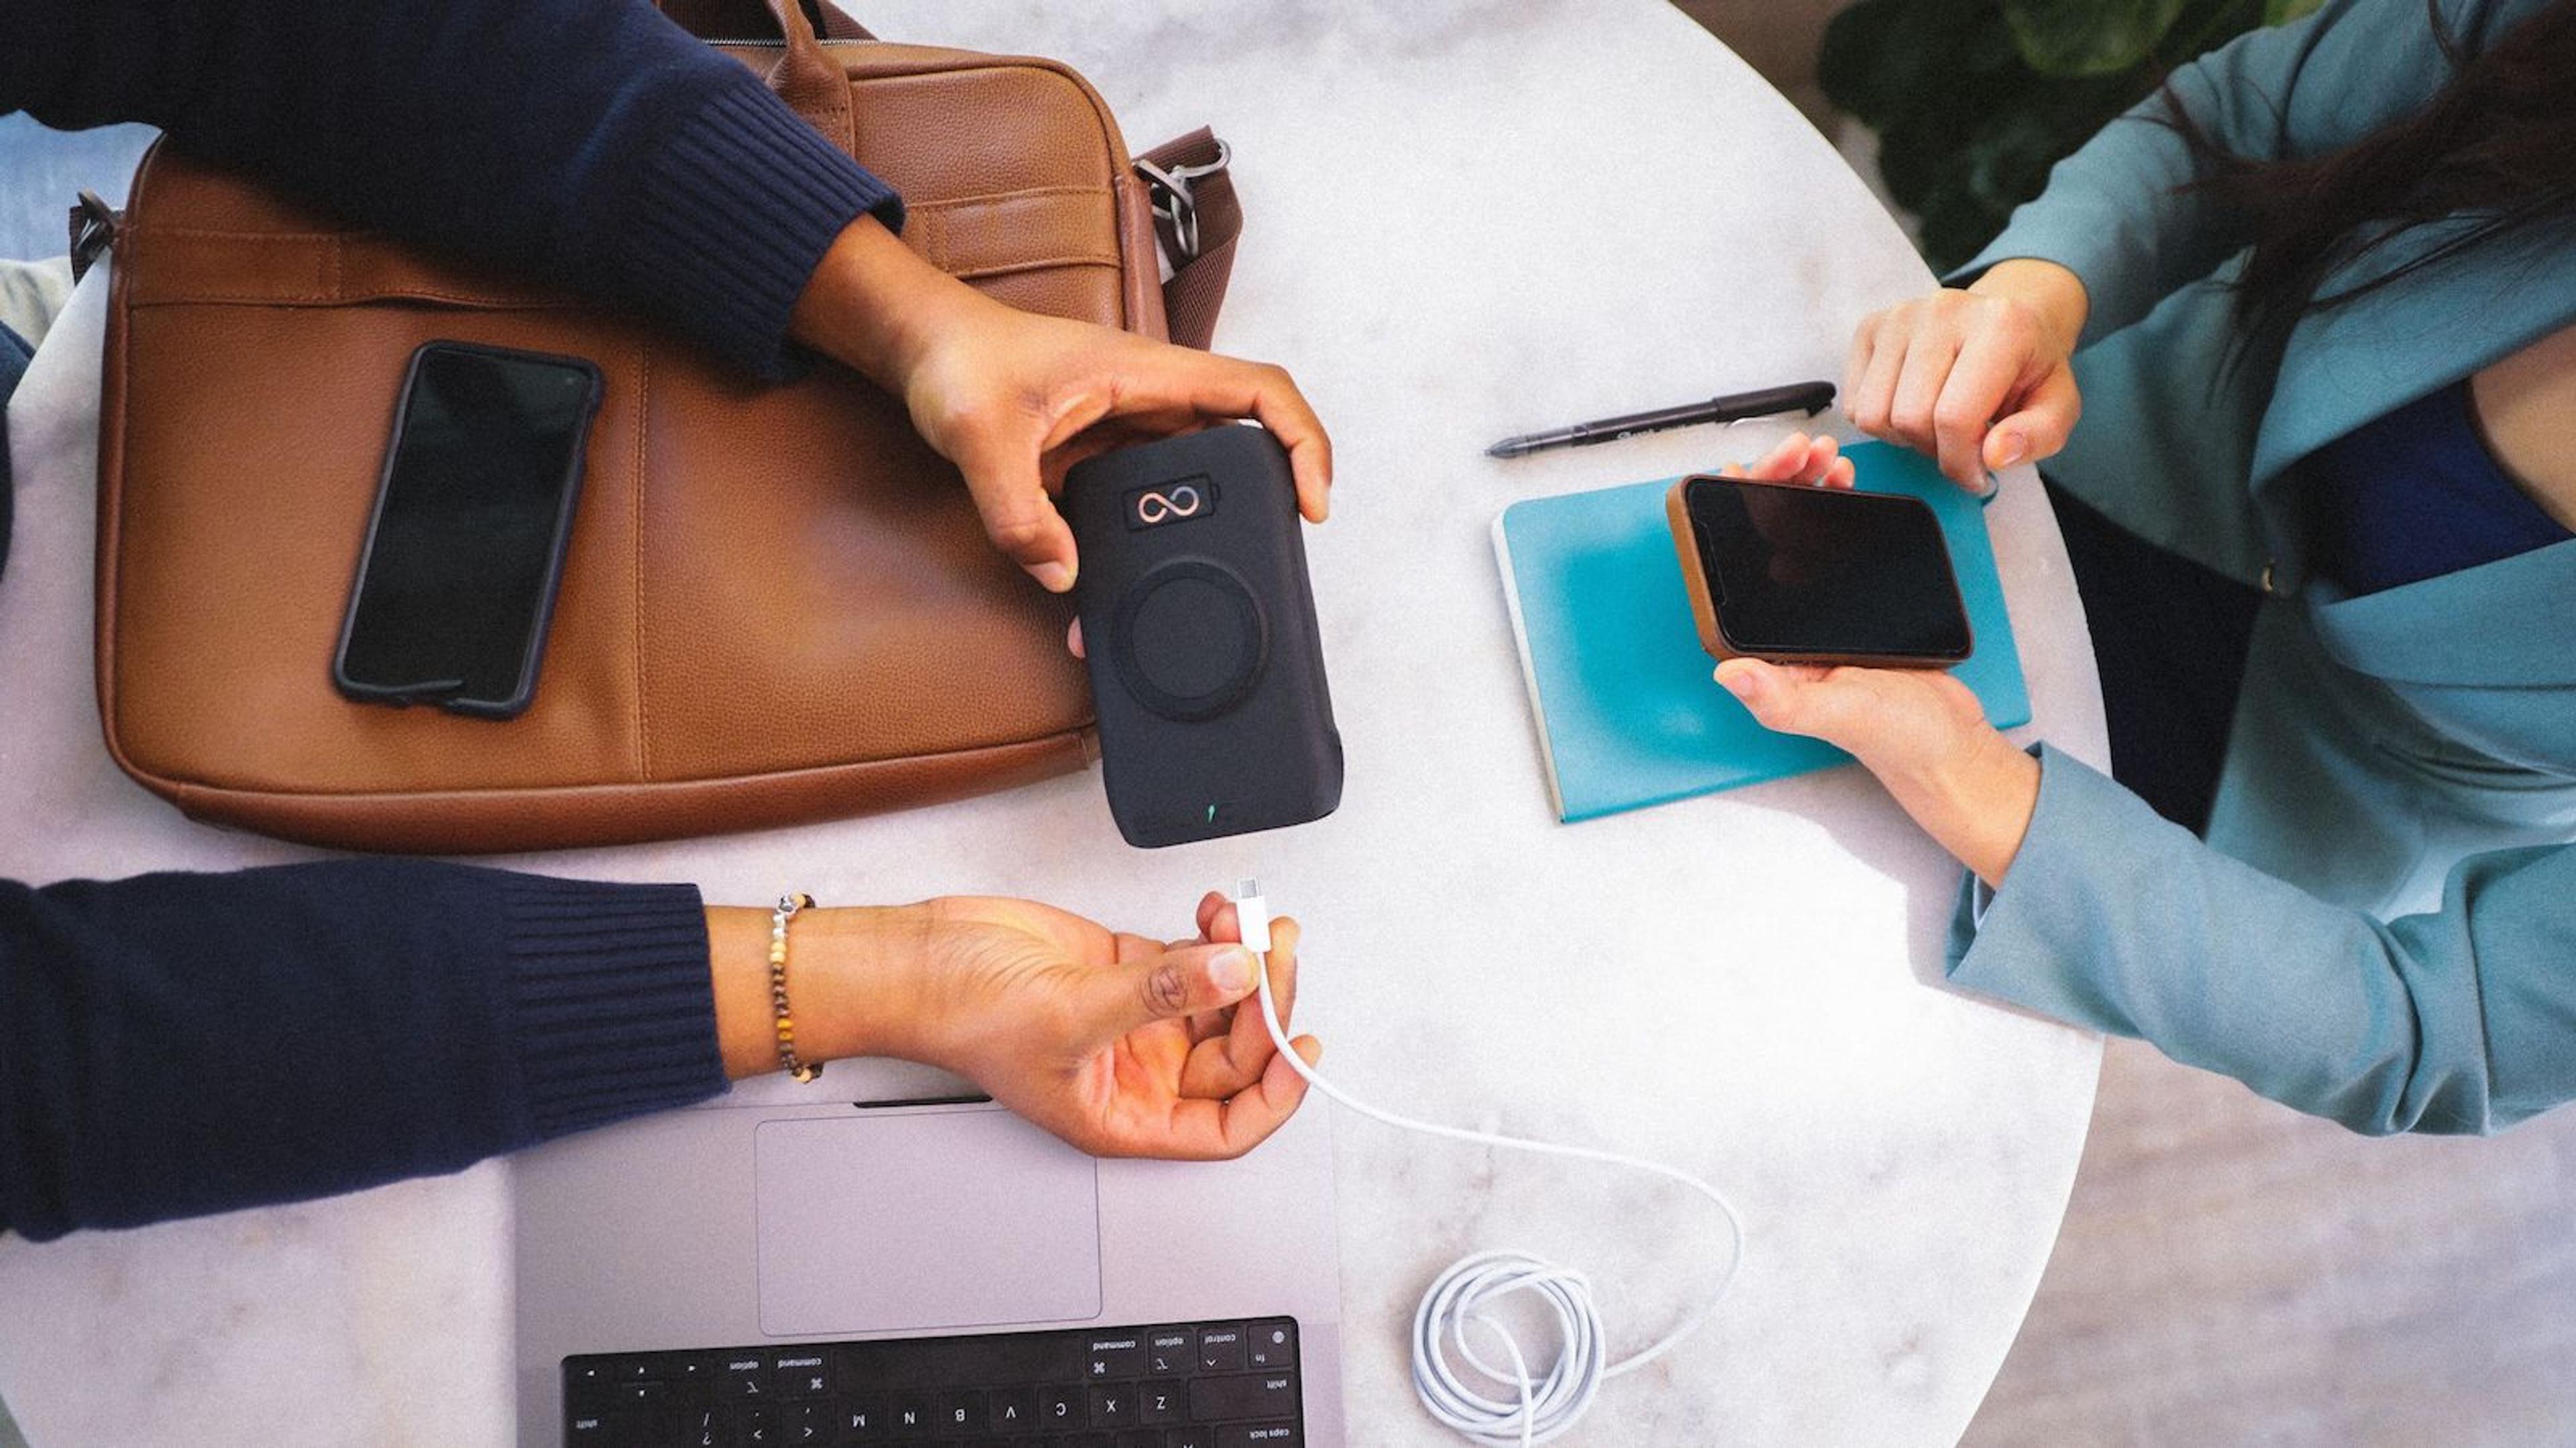 P4 wireless power bank charges 30% faster than power delivery (PD) with InstaCharge tech » Gadget Flow